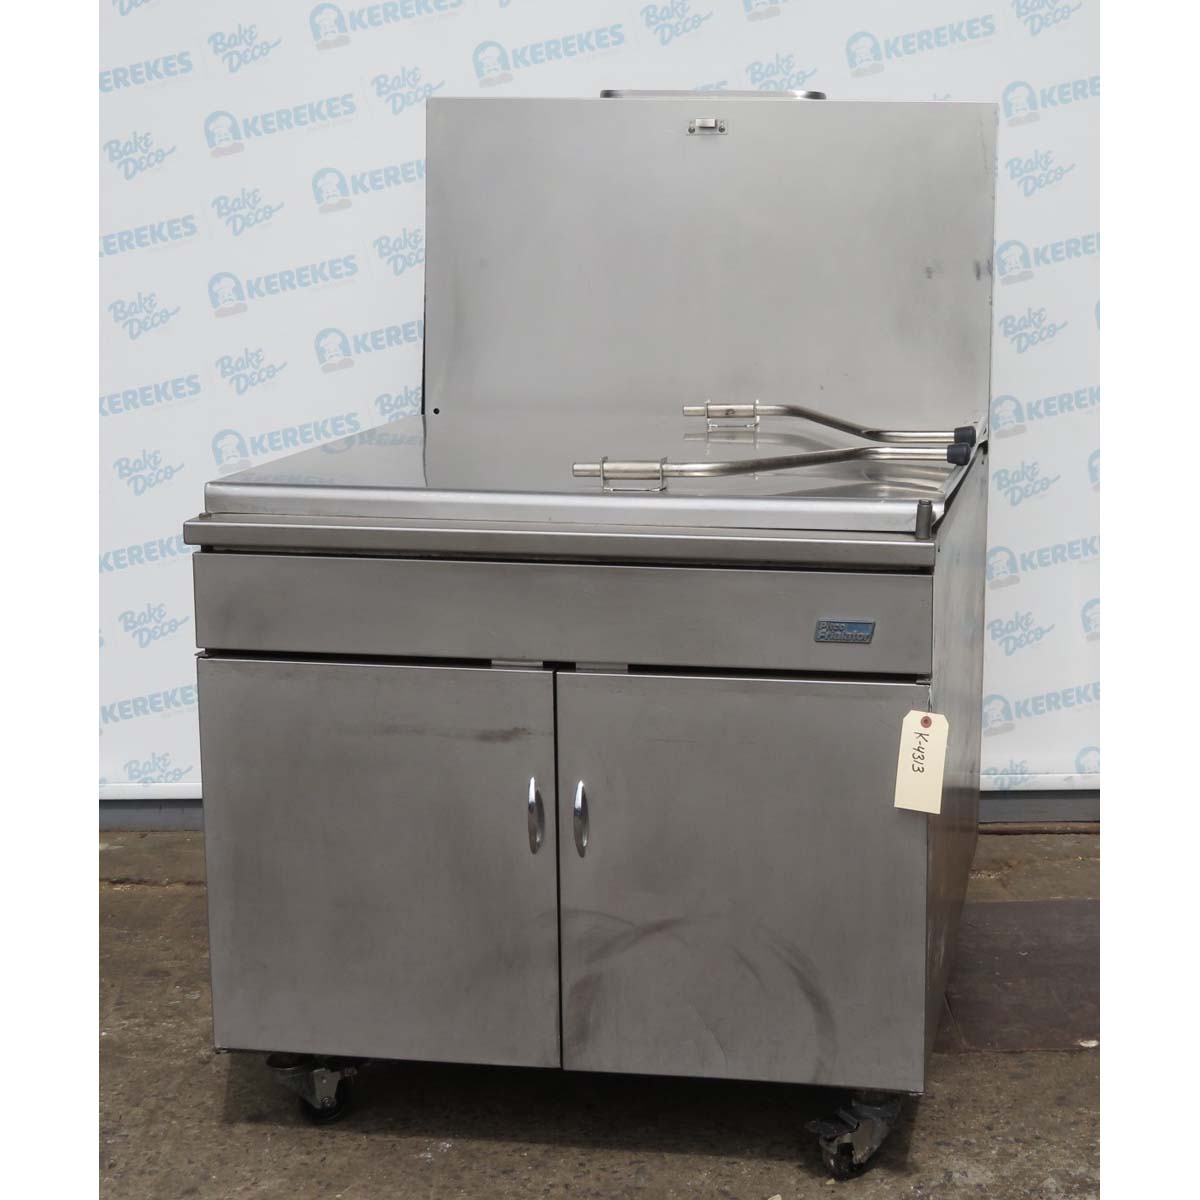 Pitco 34PS Gas Donut Fryer, 210 Lb Oil Capacity, Used Excellent Condition image 3